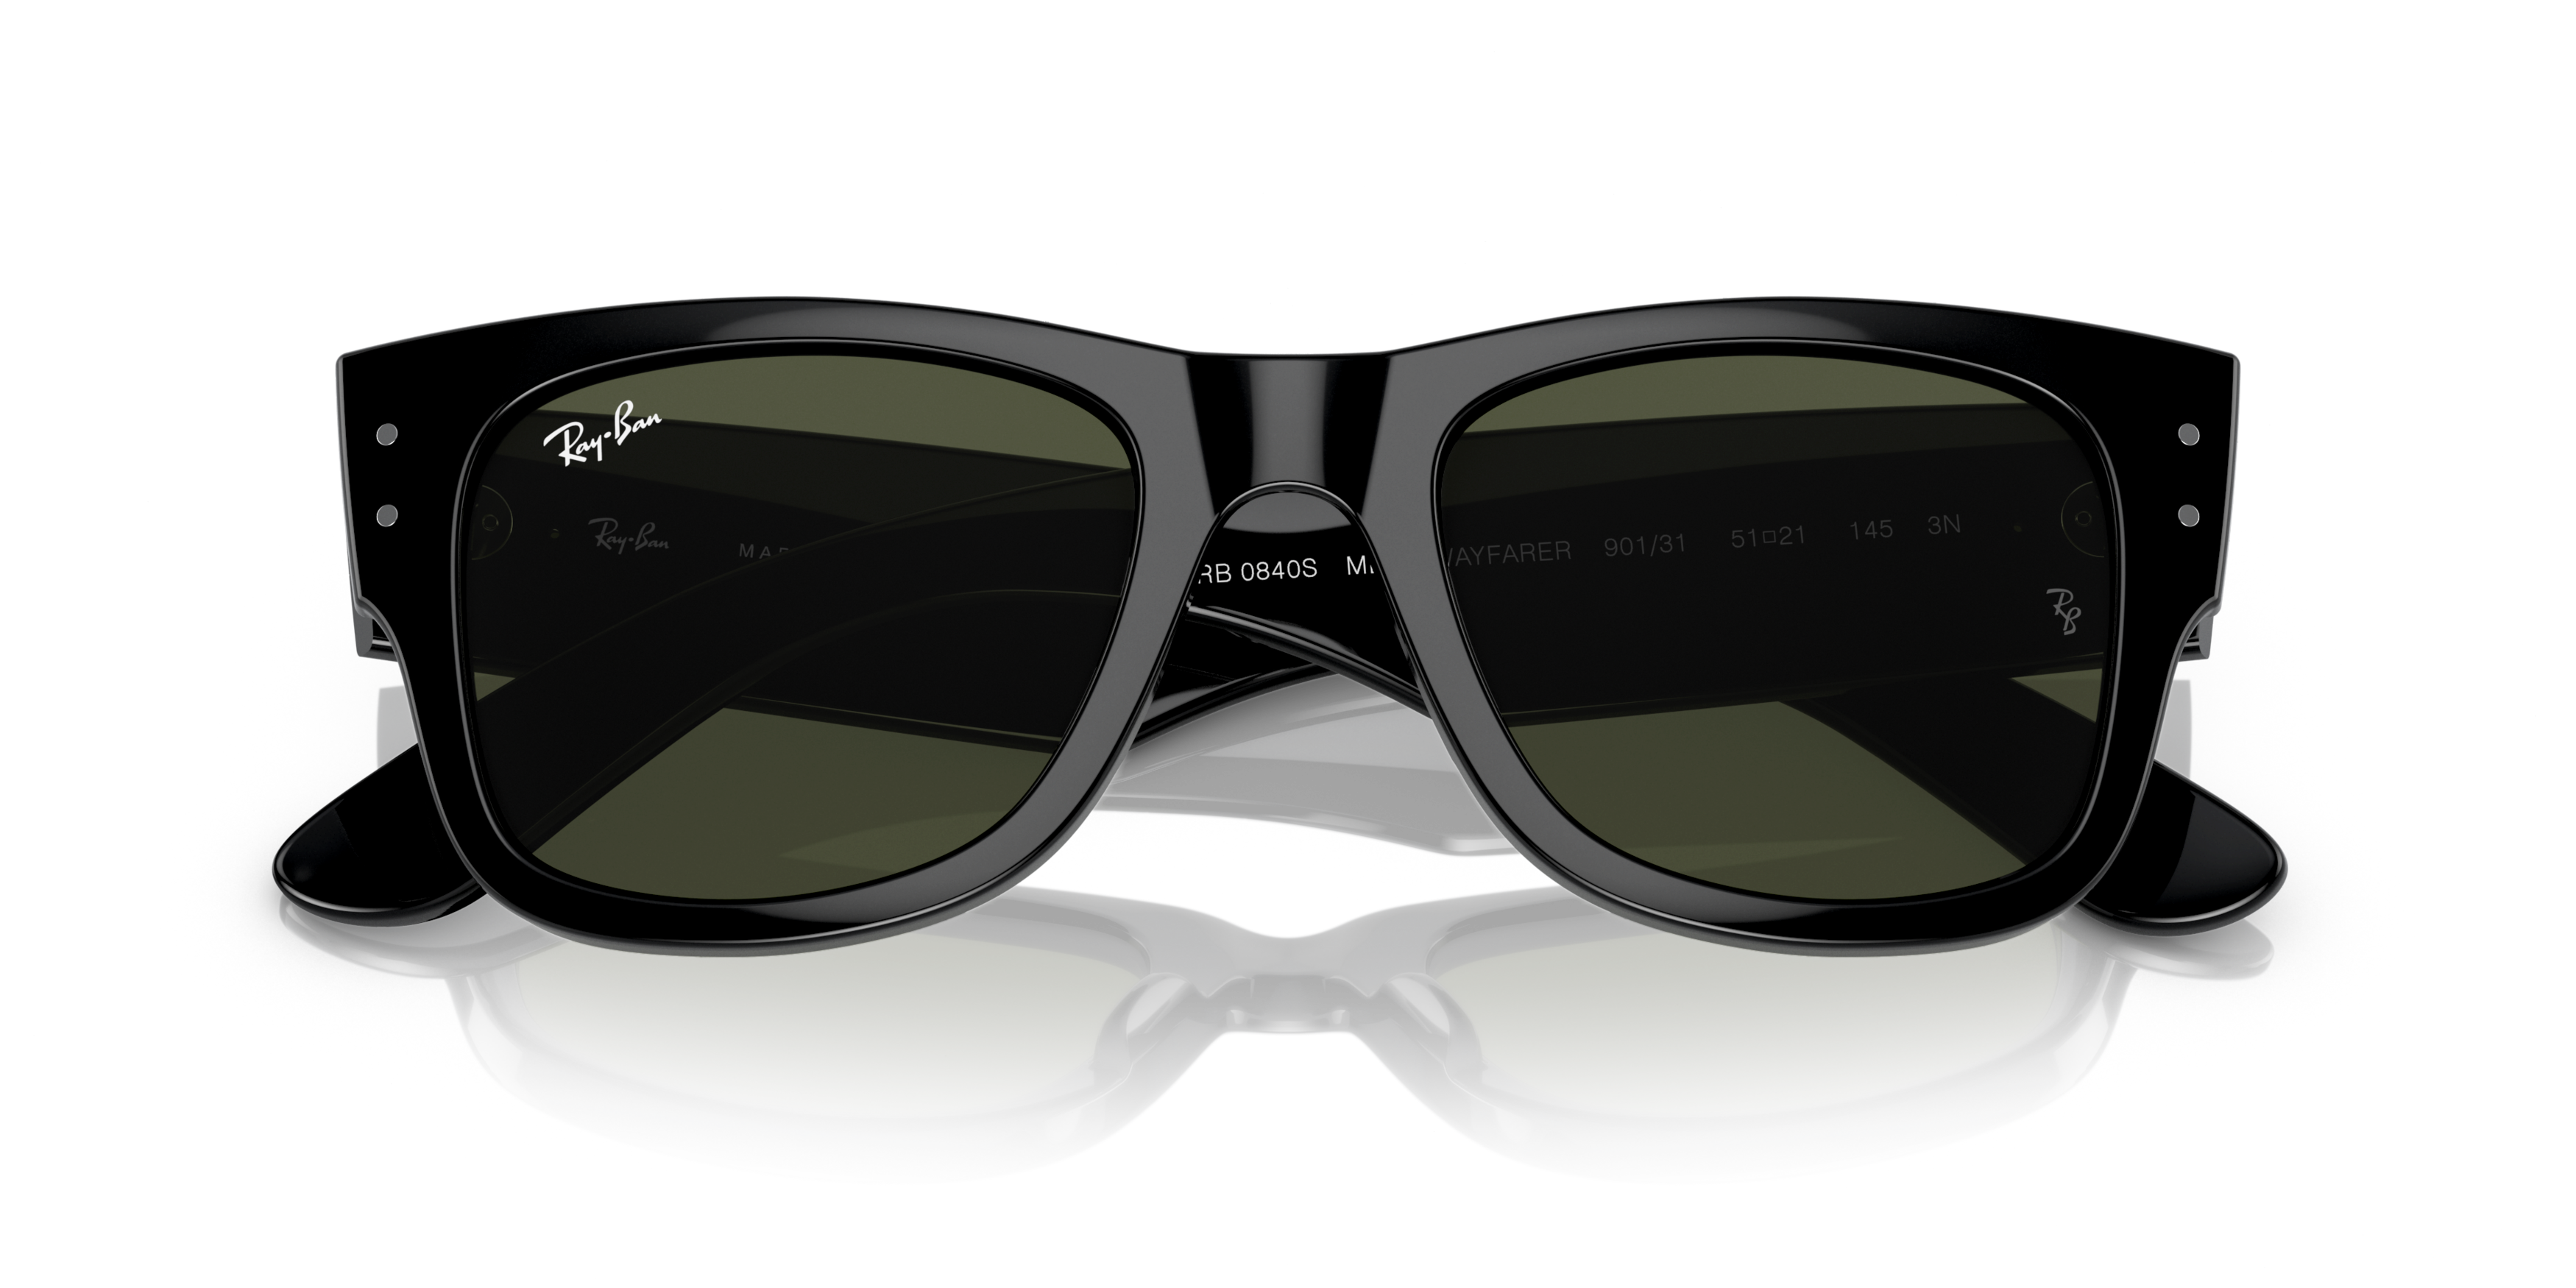 [products.image.folded] Ray-Ban 0RB0840S 901/31